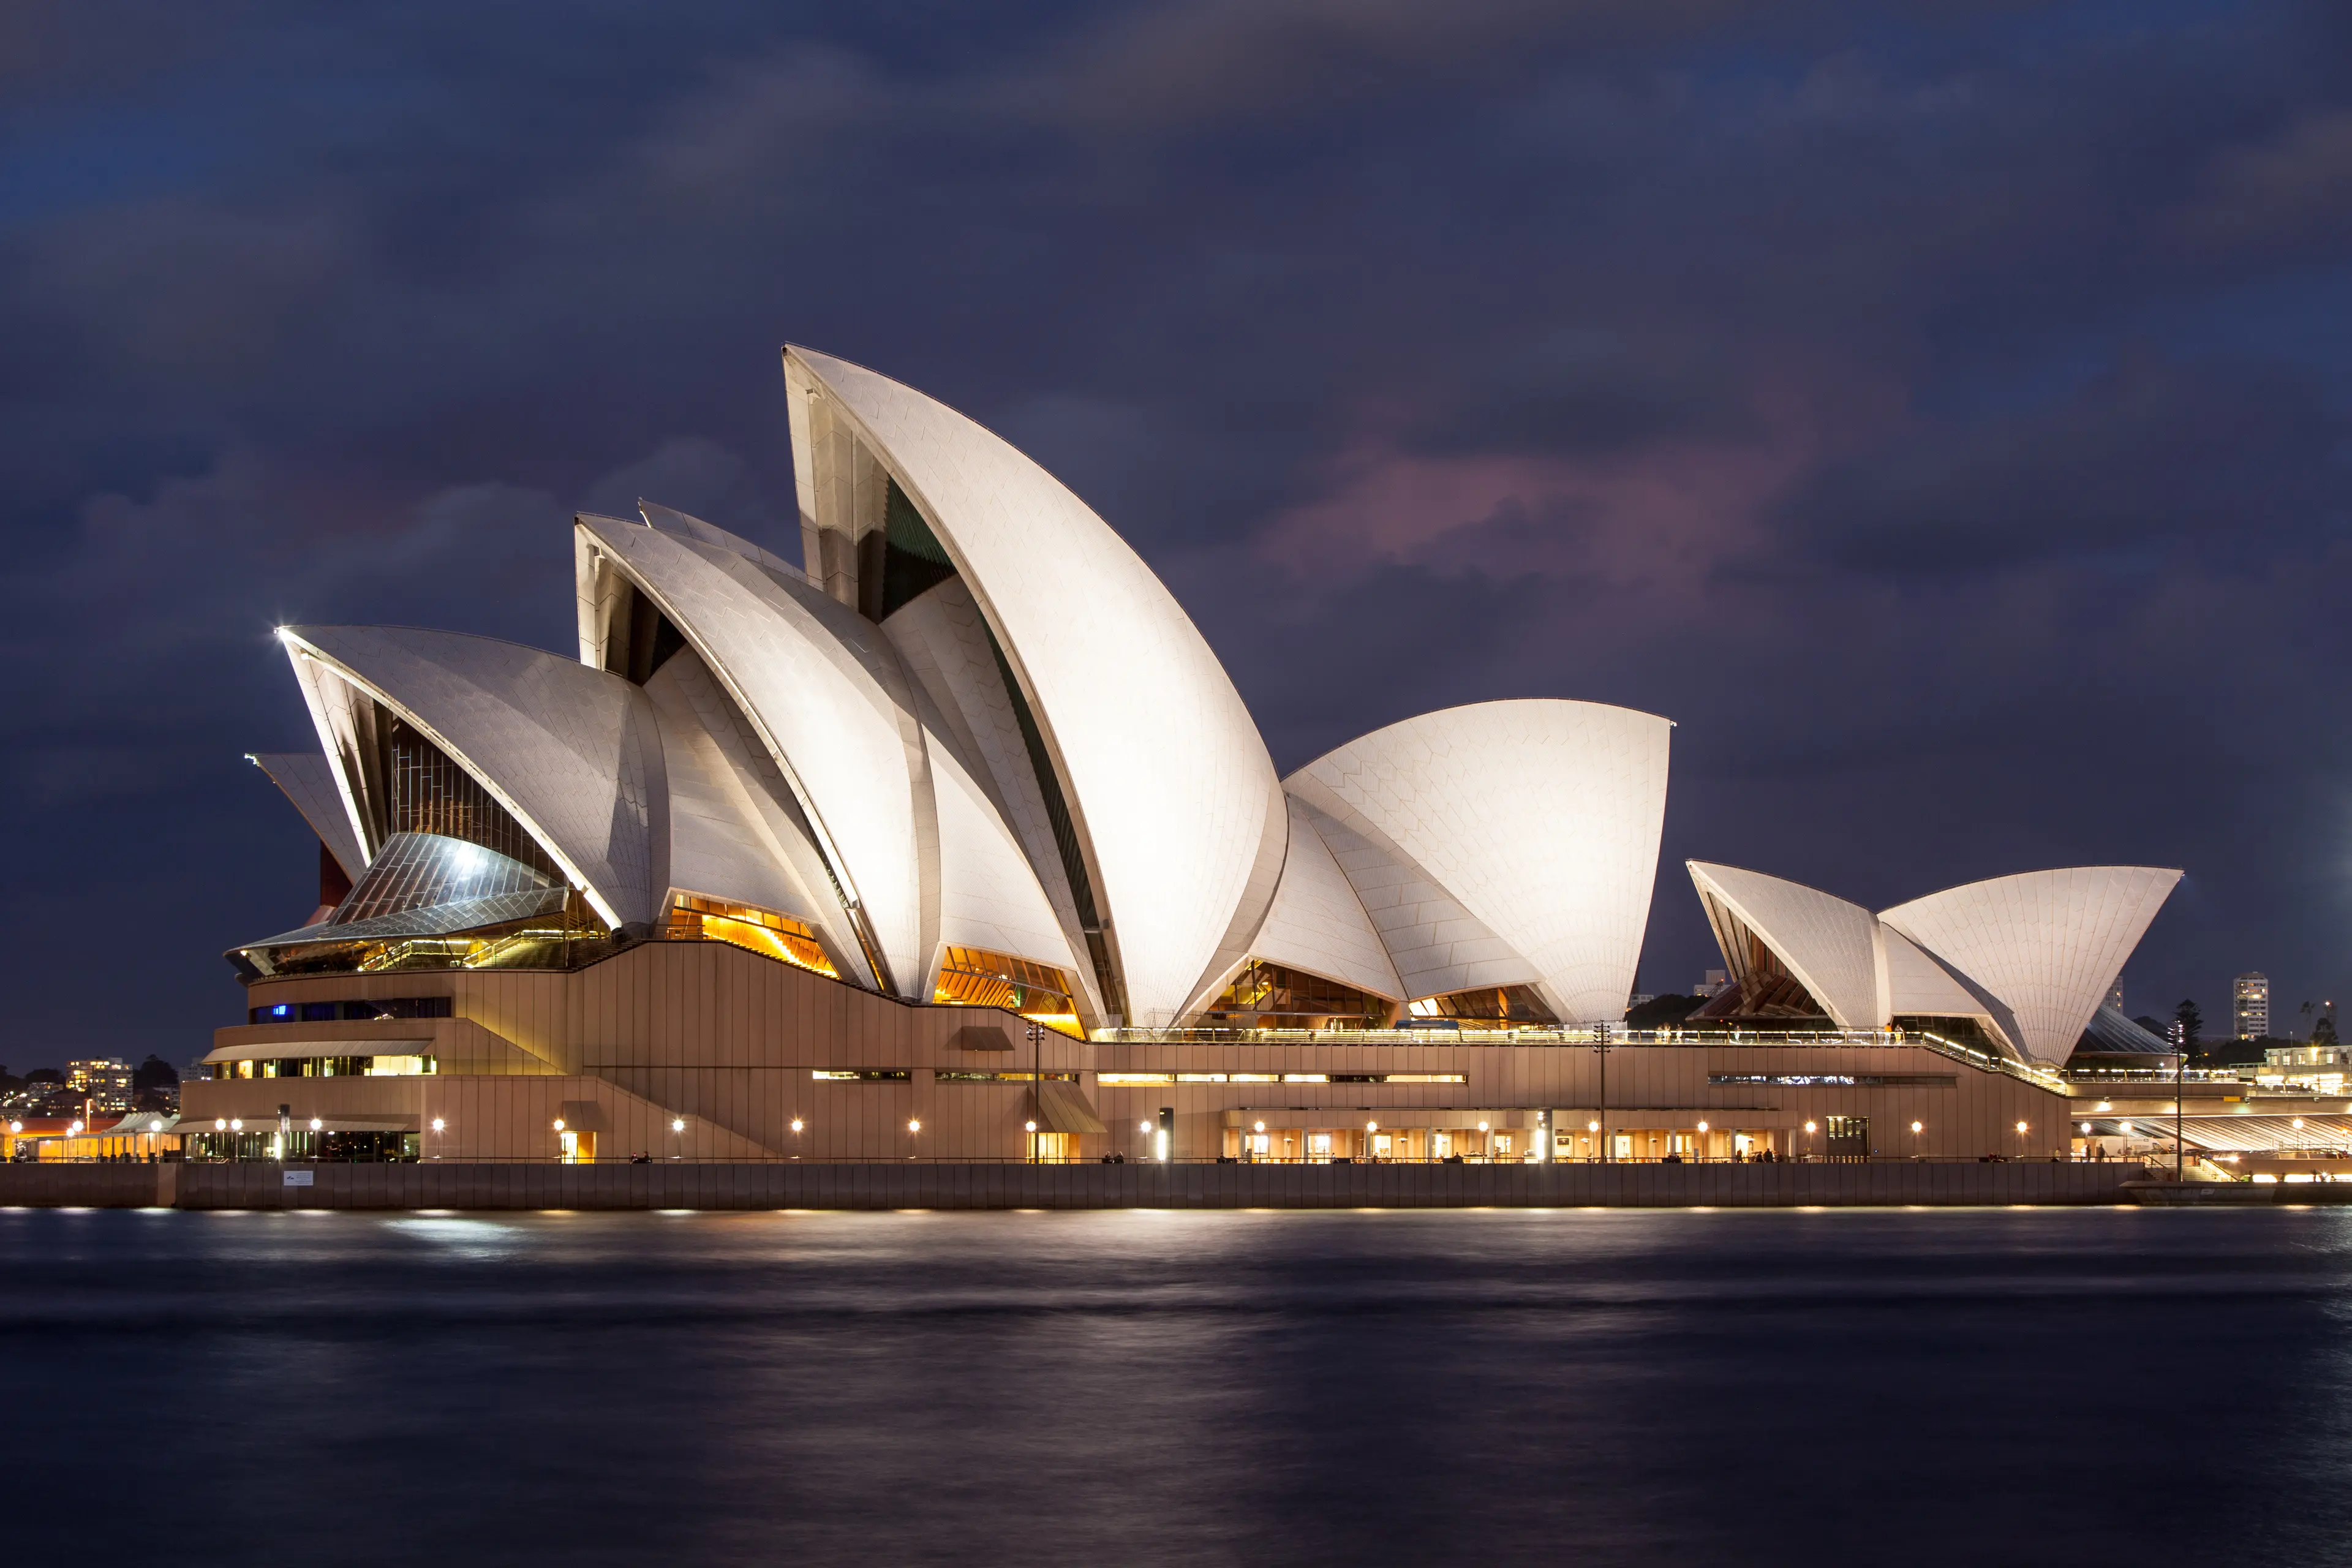 4-Day Sightseeing and Outdoor Family Adventure in Sydney